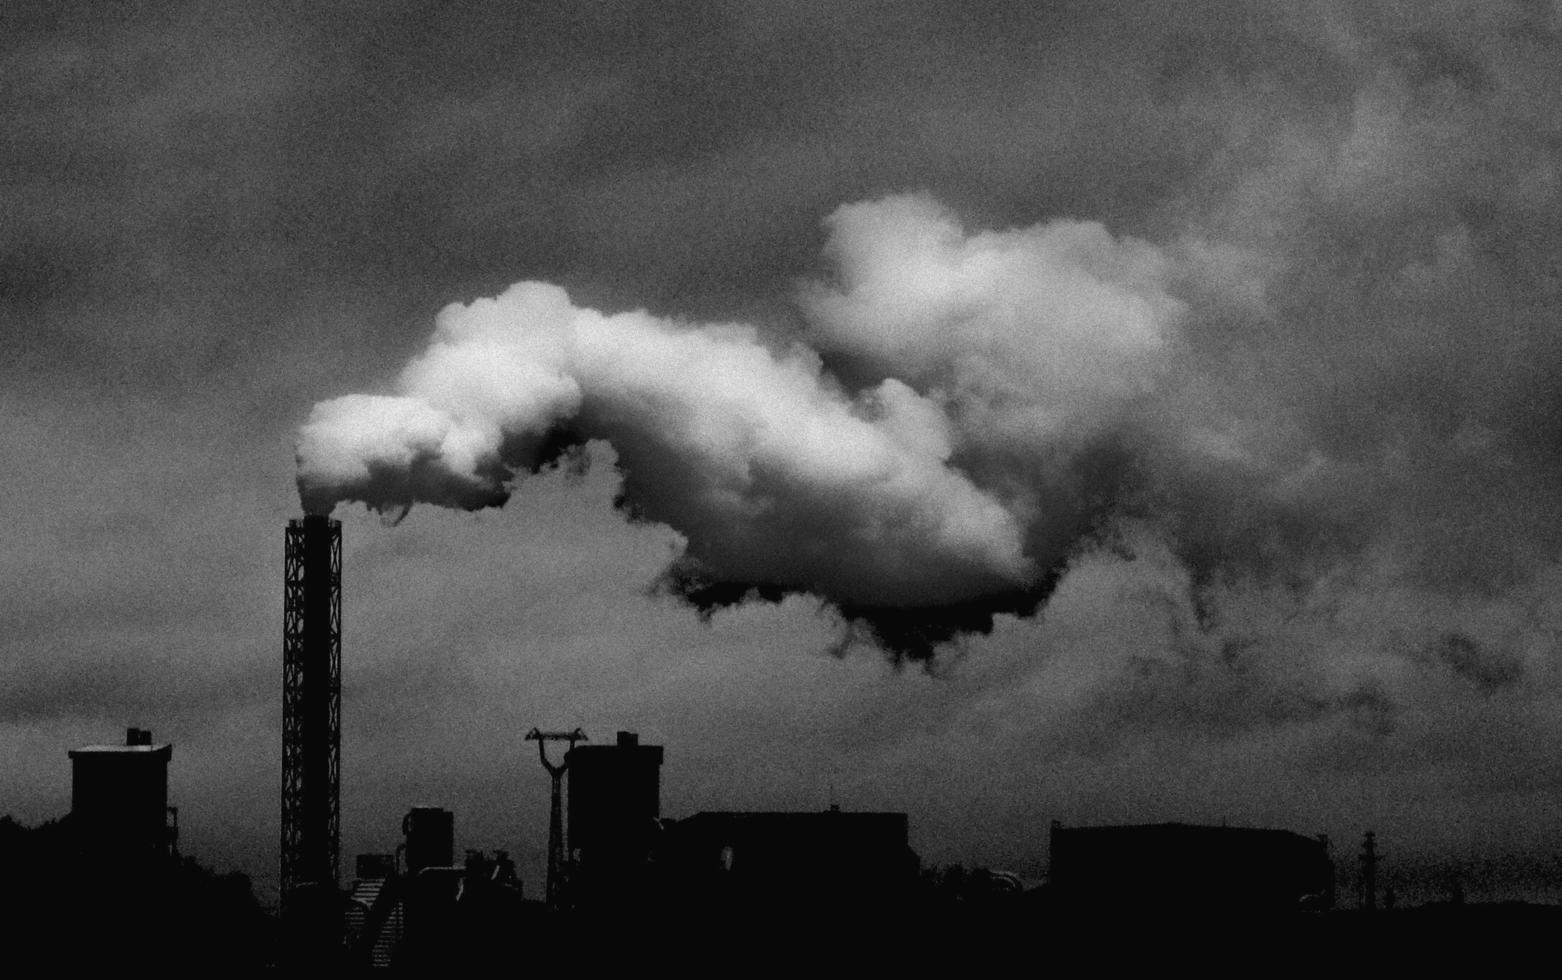 Monochrome of an industrial plant photo